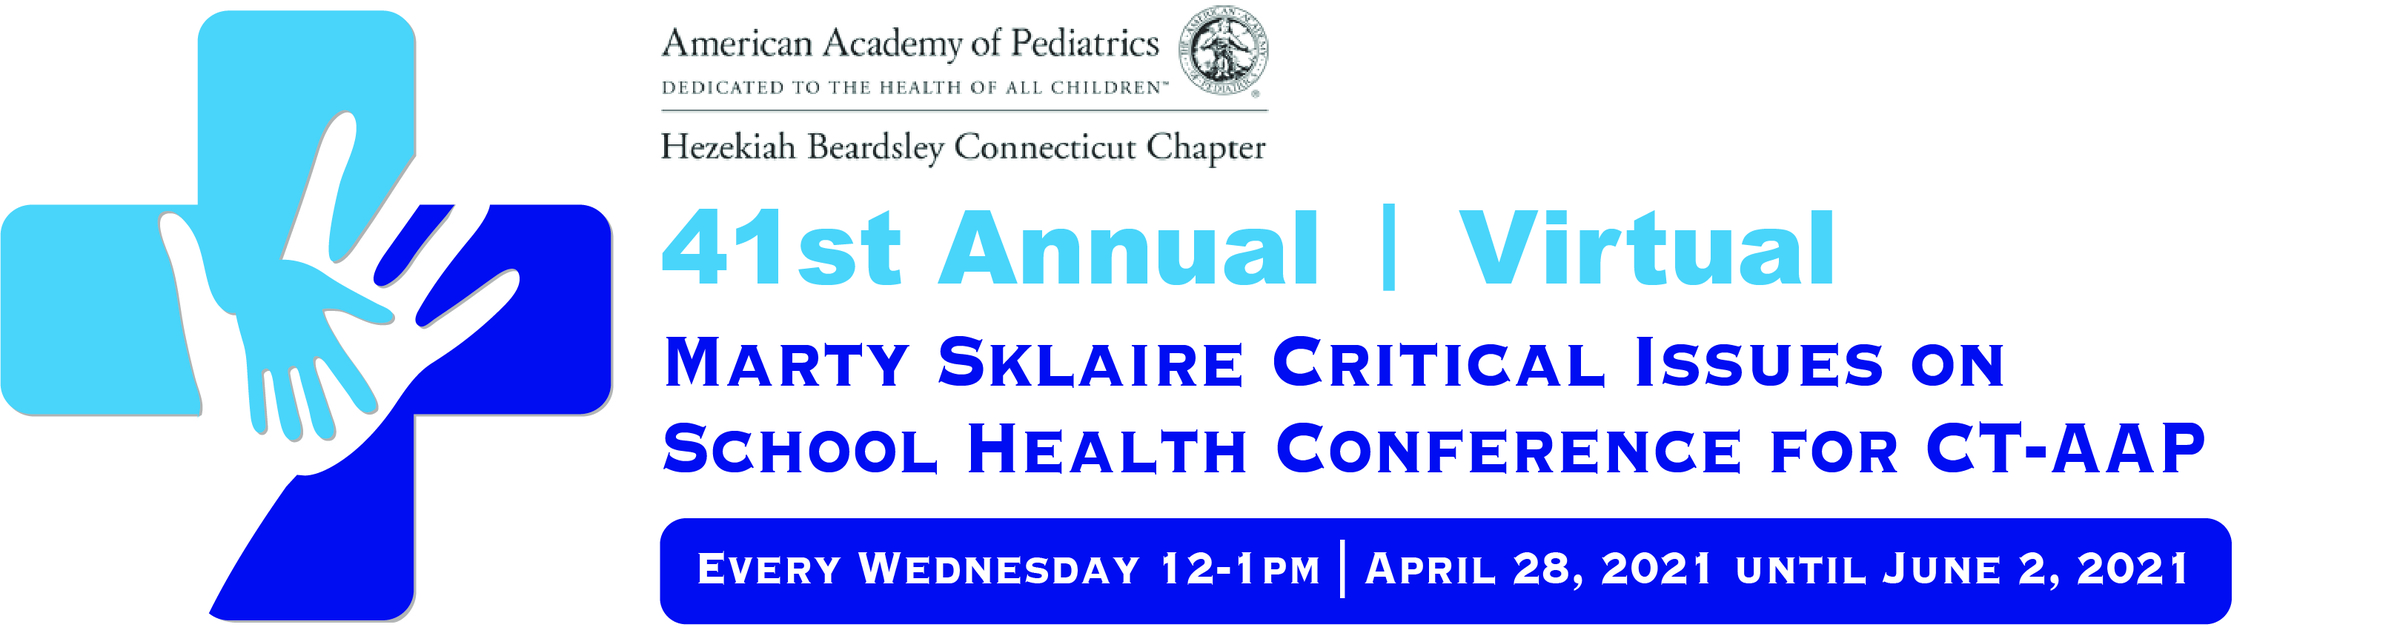 41st Annual Marty Sklaire Critical Issues on School Health Conference 